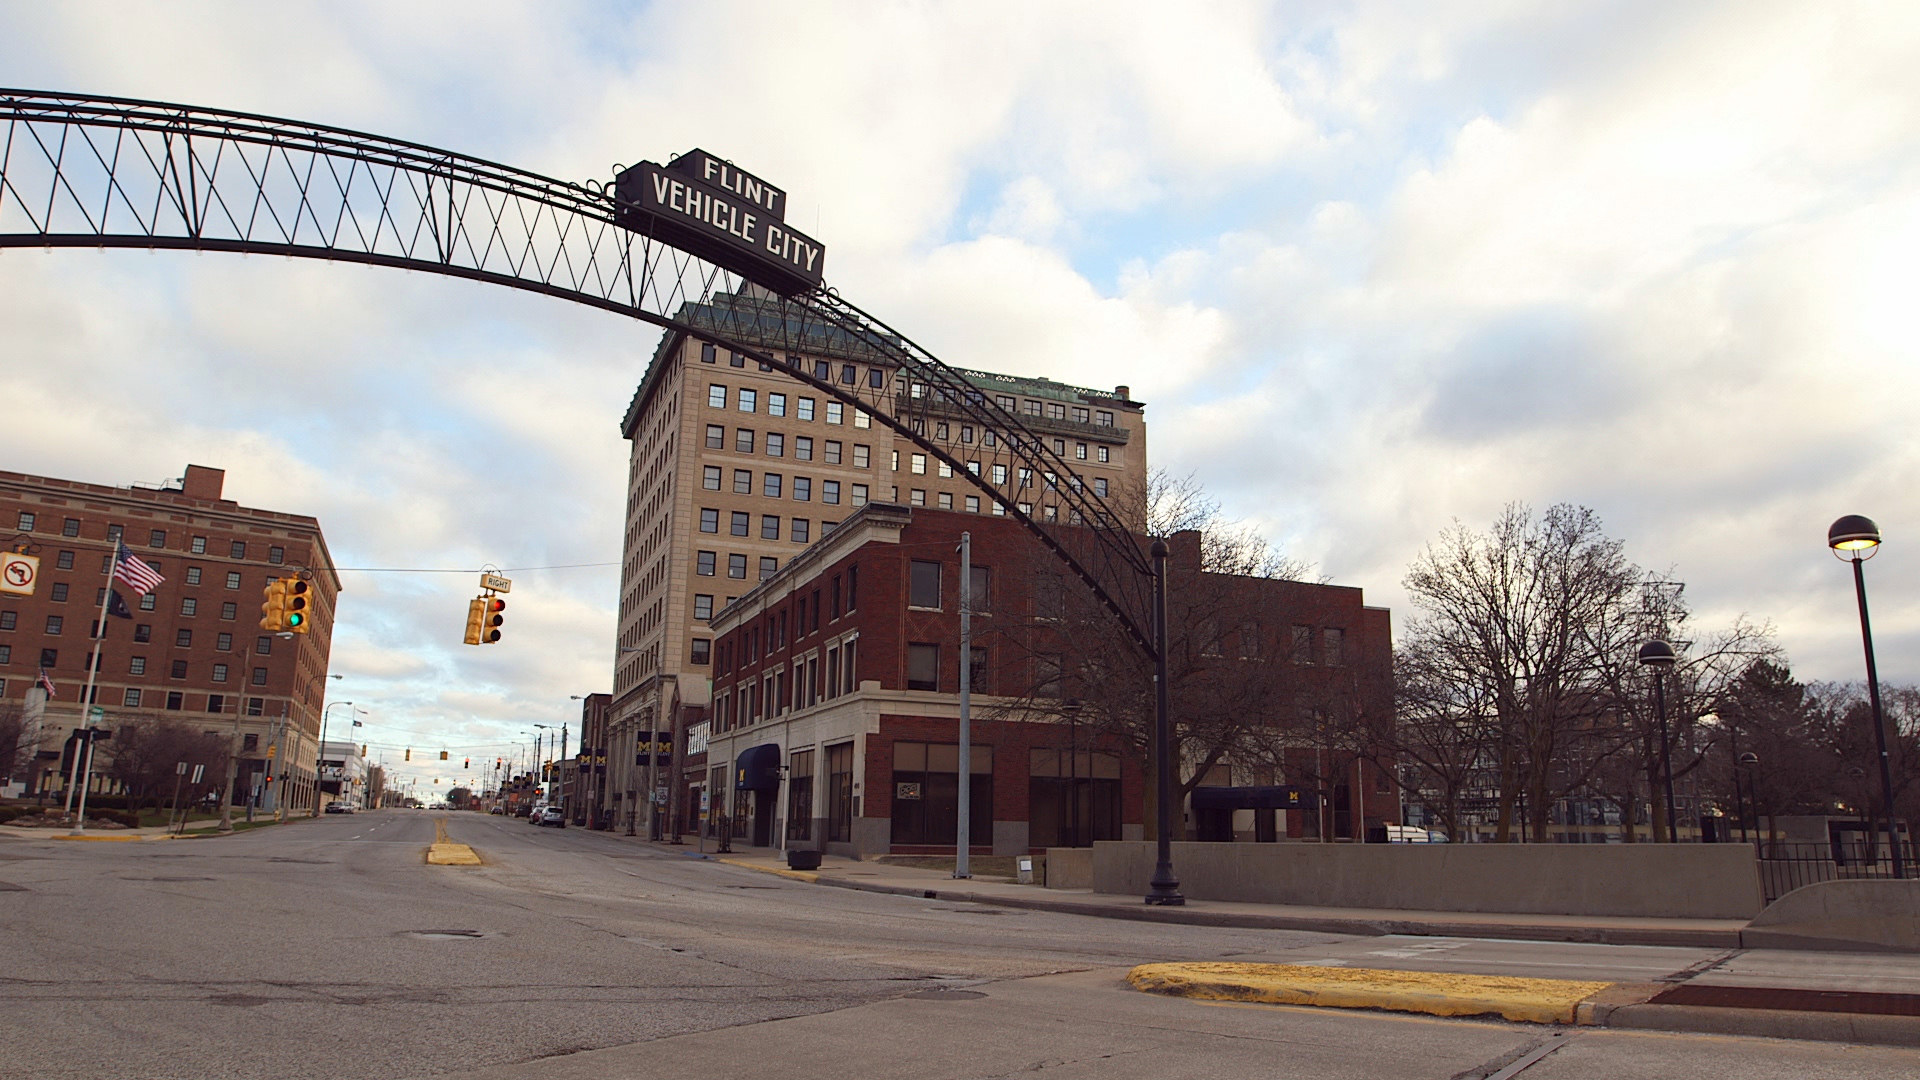 PHOTO: A Flint "Vehicle City" sign stands on Saginaw Street in downtown Flint, Mich. 